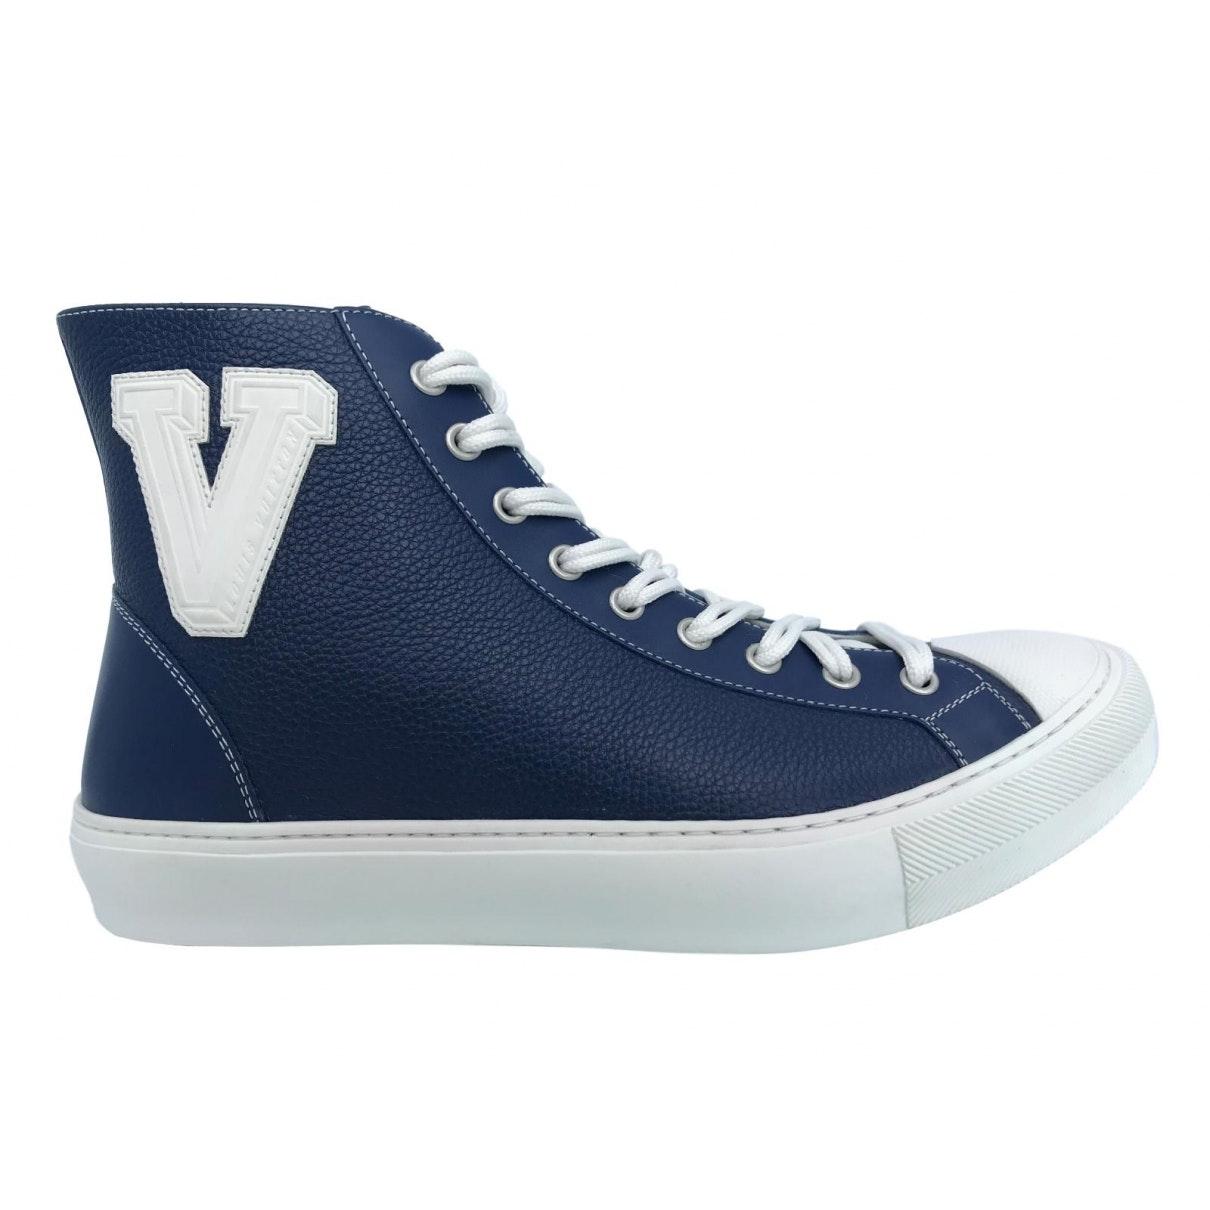 Louis Vuitton Leather High Trainers in Navy (Blue) for Men - Lyst